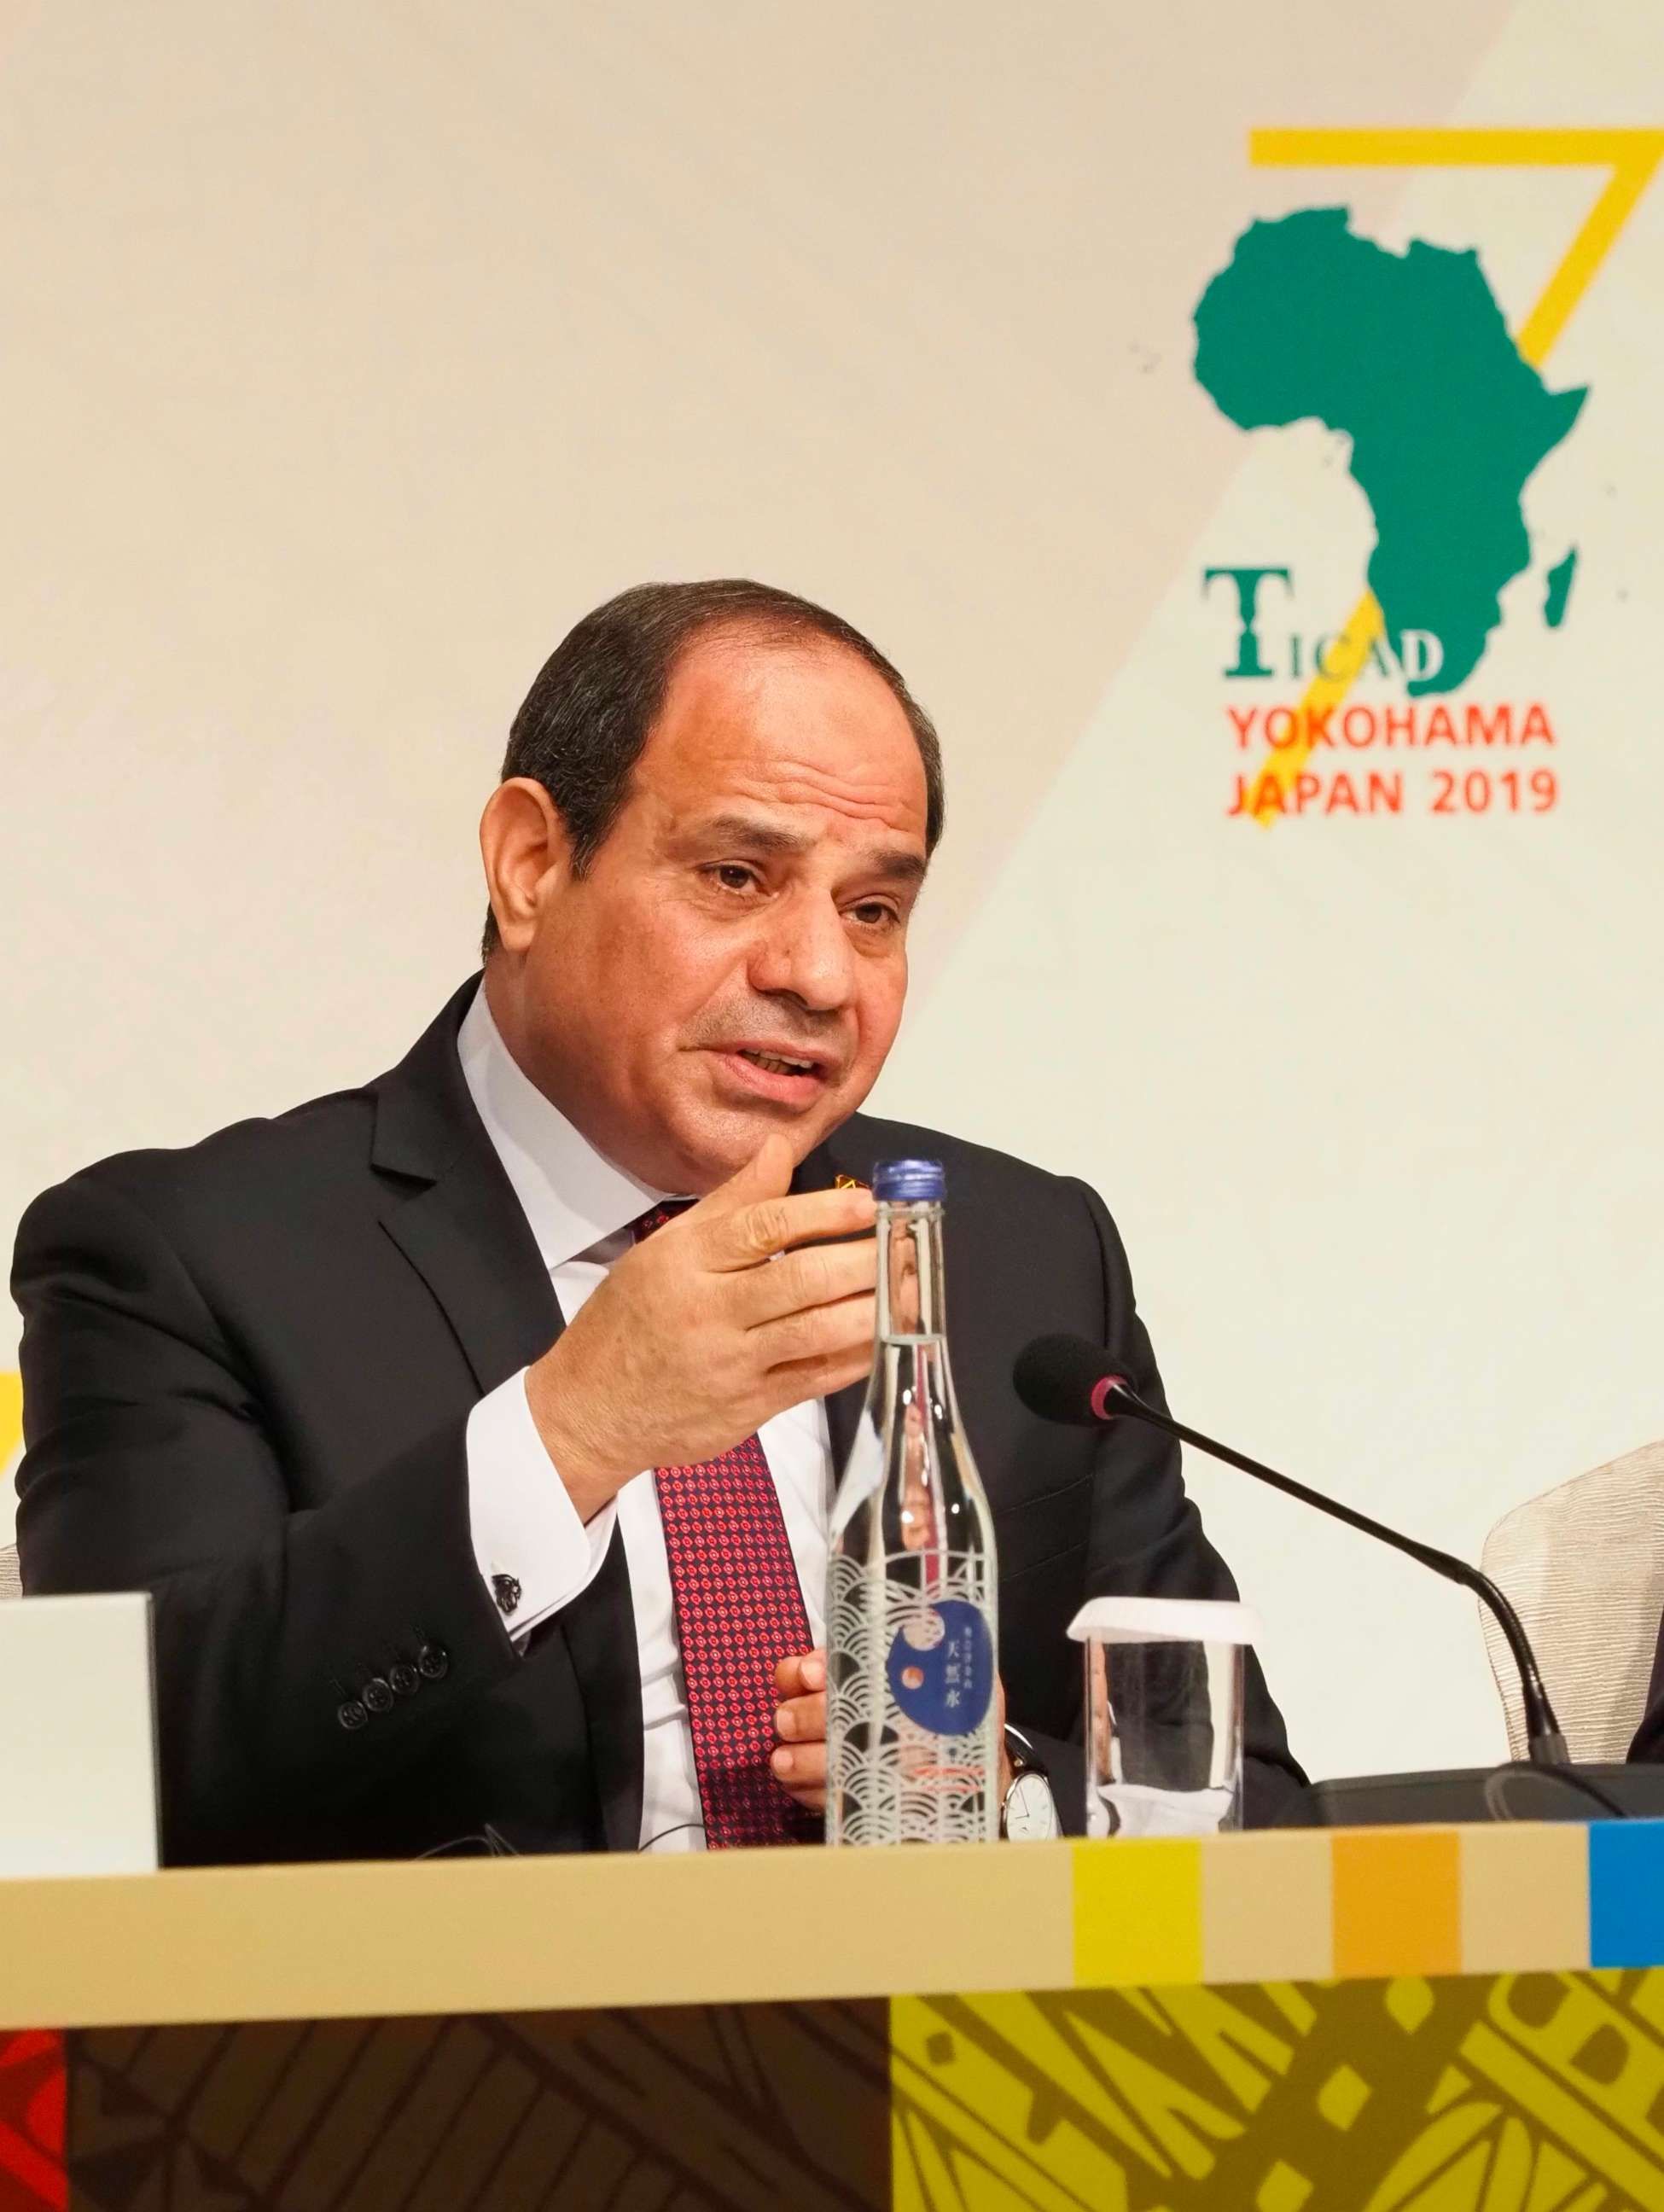 PHOTO: African Union Chairperson and Egypts President Abdel Fattah al-Sisi answers a question during a joint press conference of the seventh Tokyo International Conference on African Development (TICAD) in Yokohama on Aug. 30, 2019.